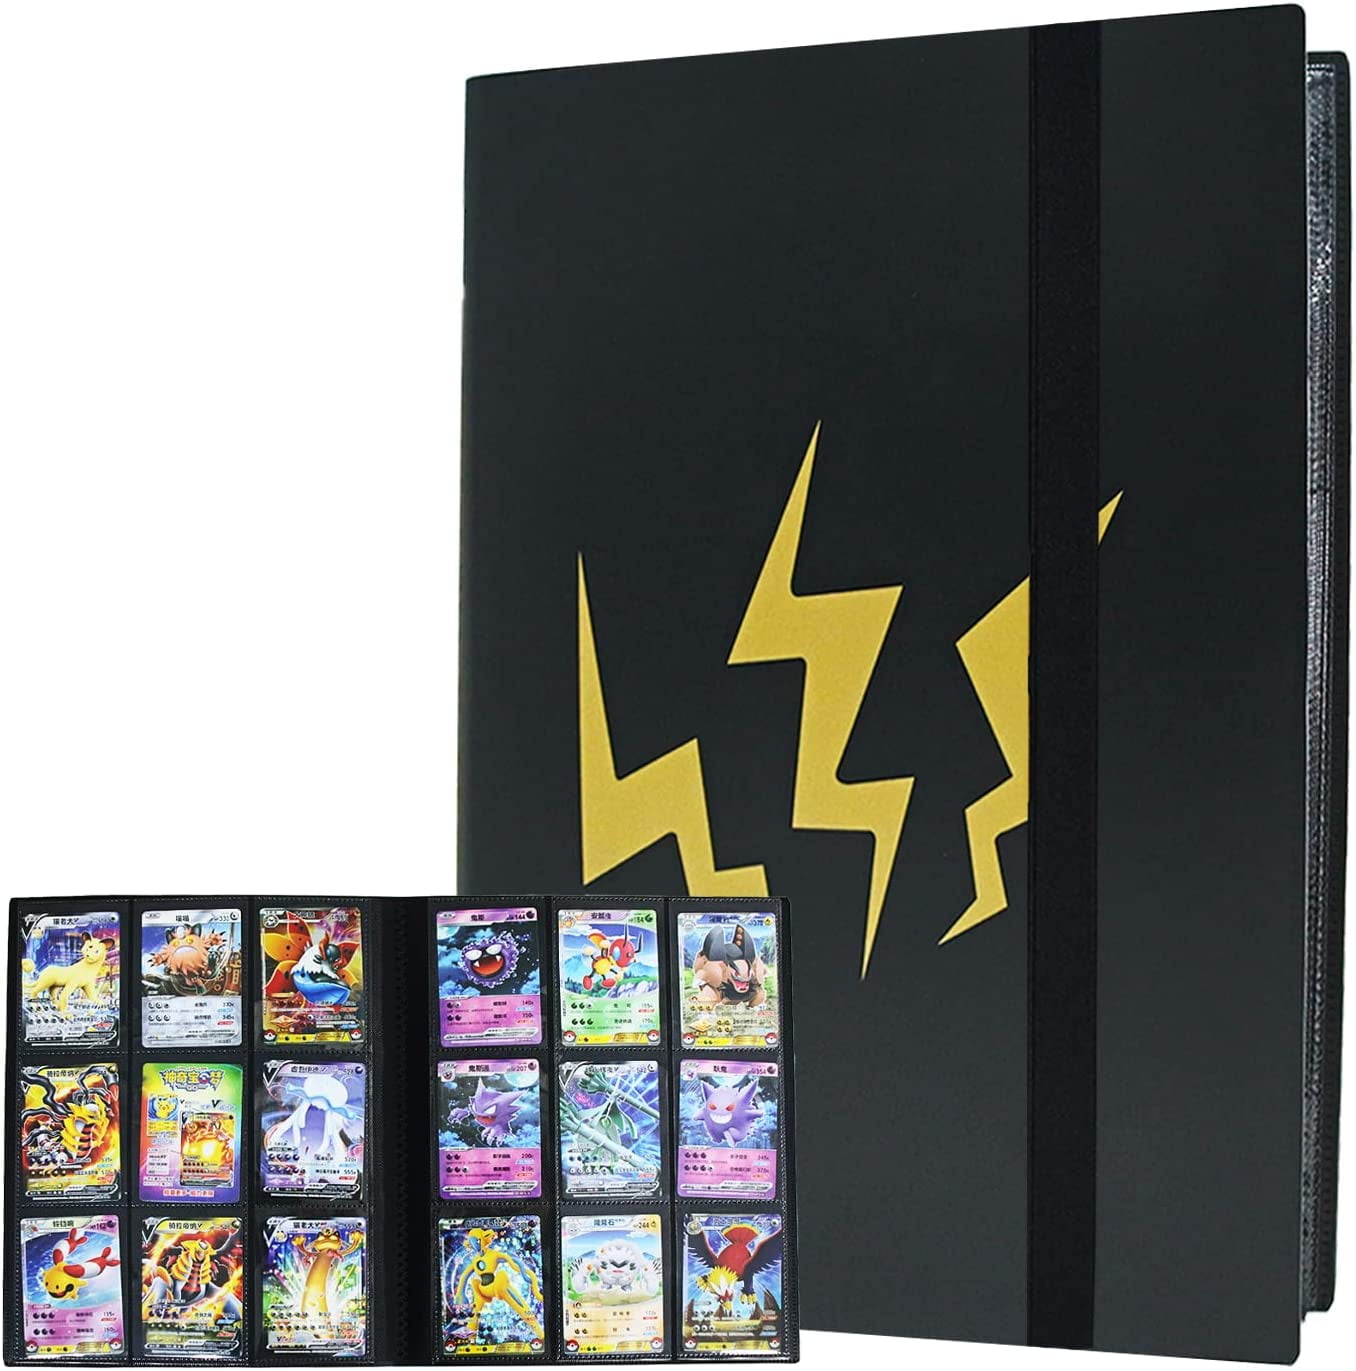 Album with 12 pages for Pokémon cards with Ponita